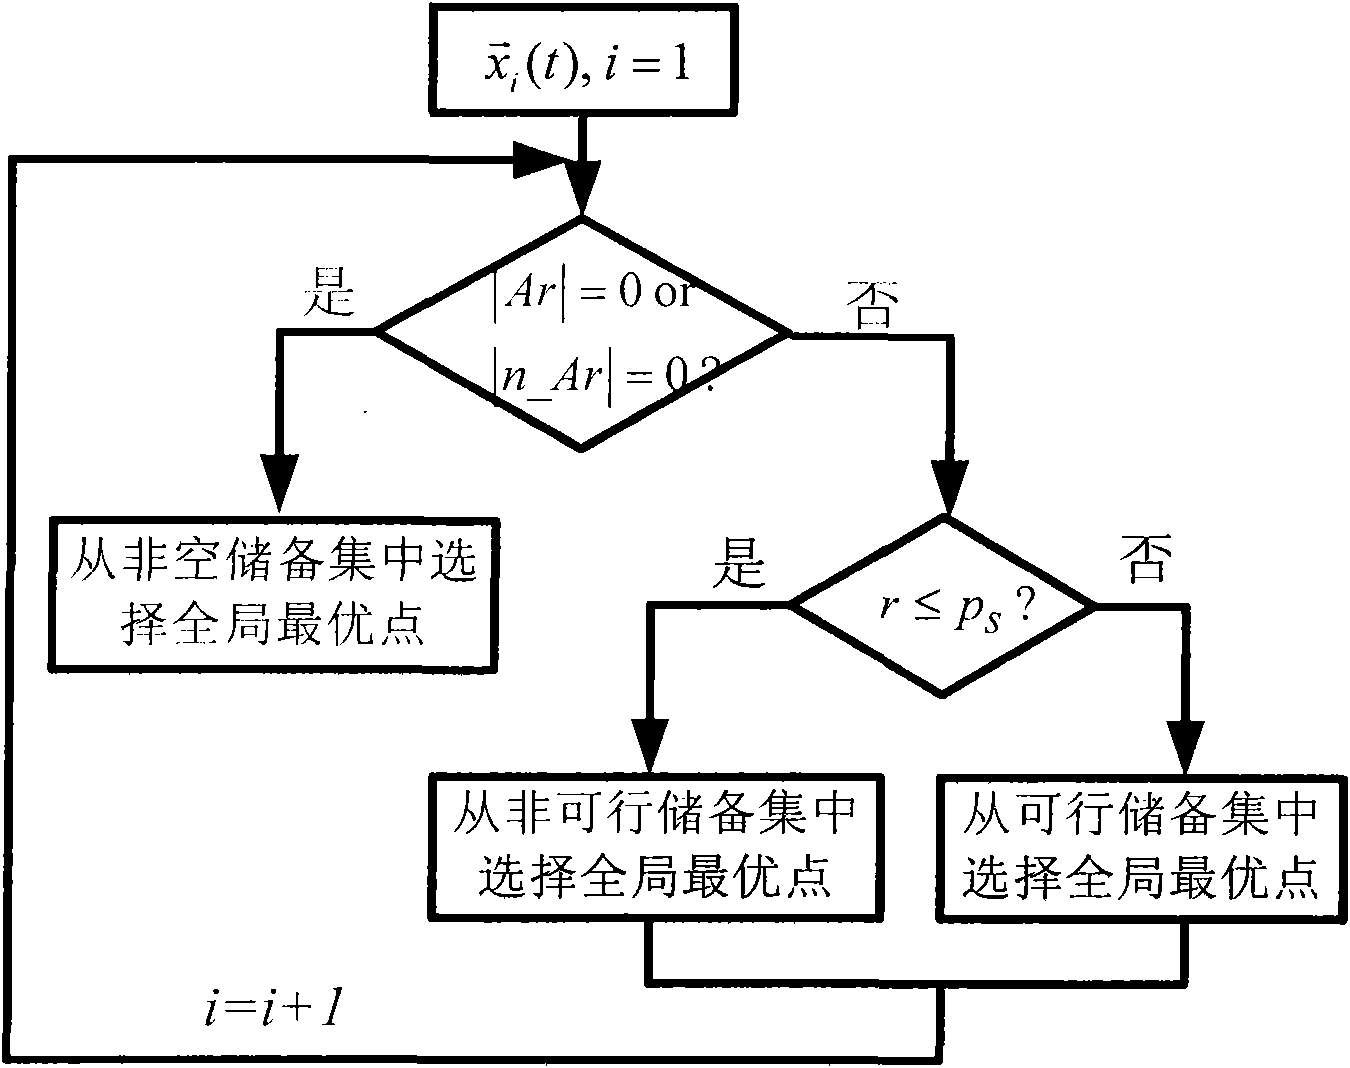 Method for planning global path of robot under risk source environment